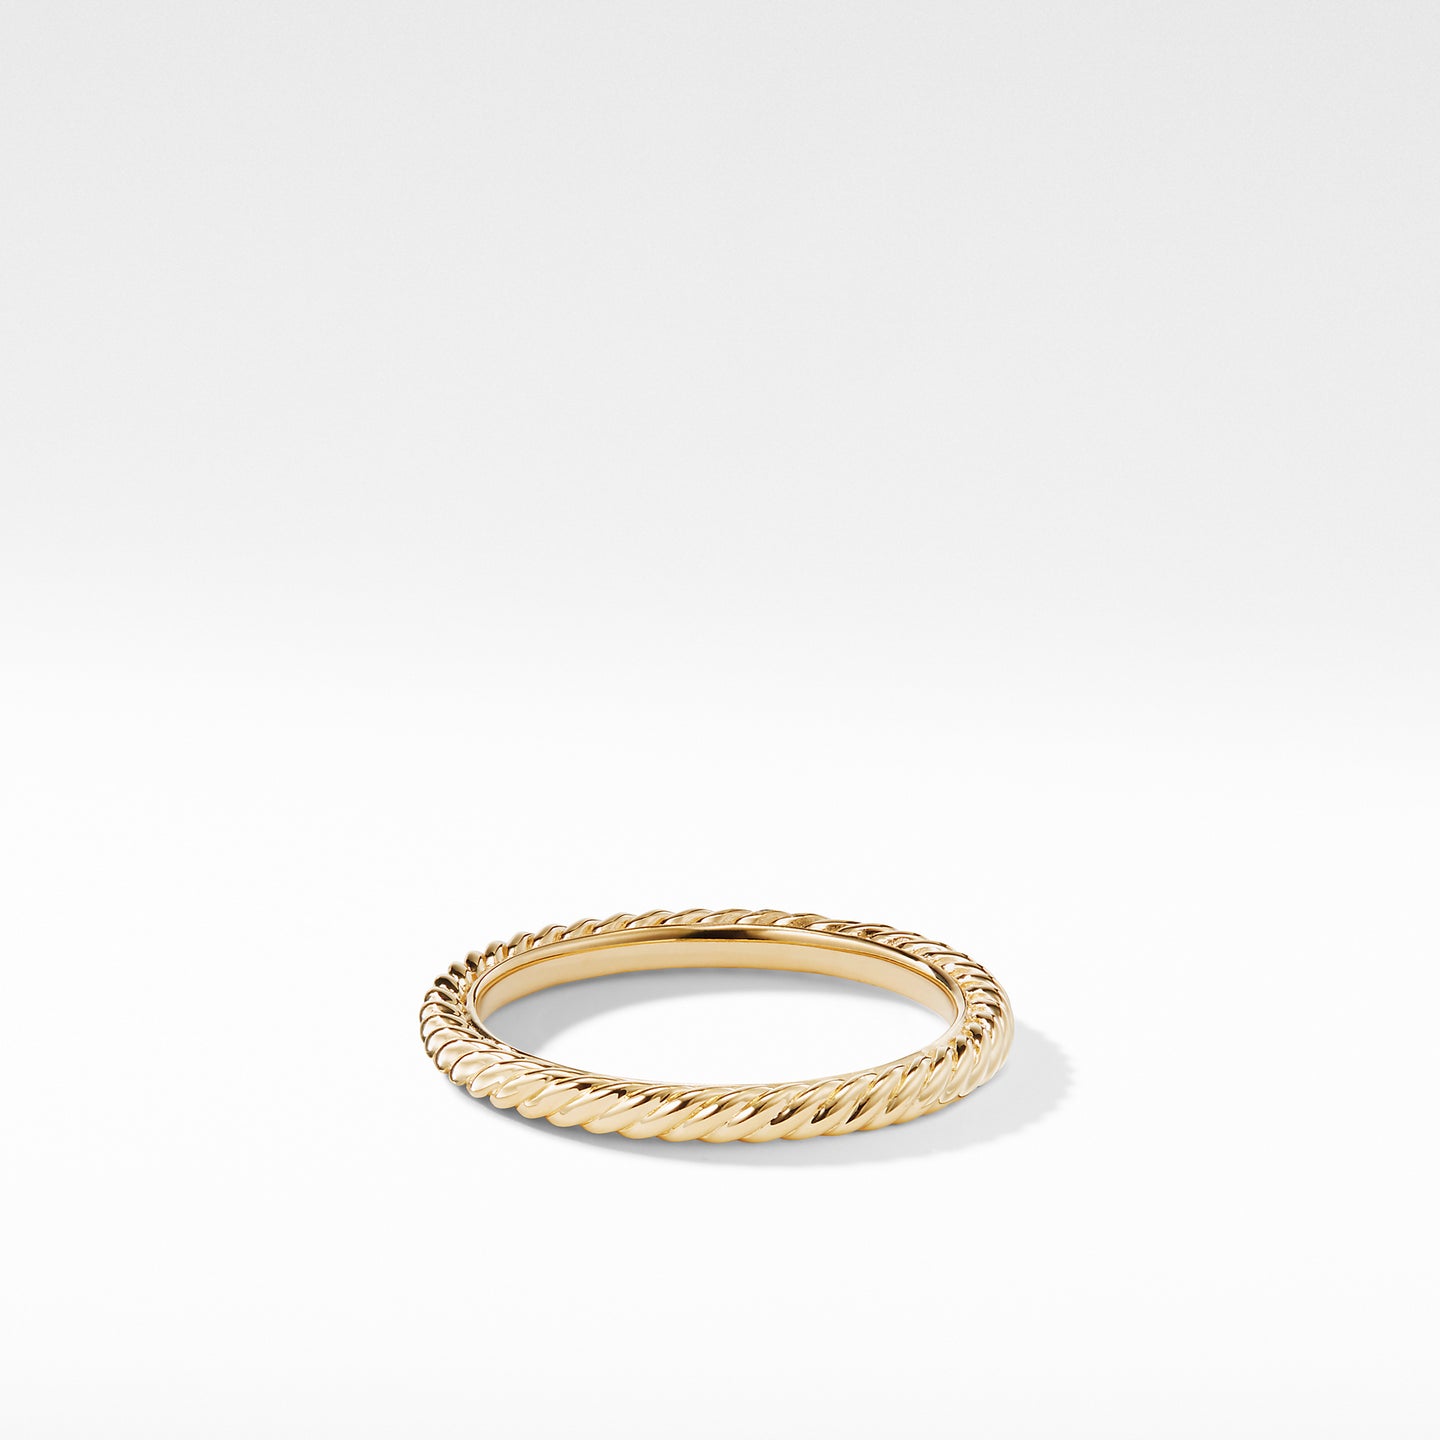 Ring in 18K Gold, Size 5.5.